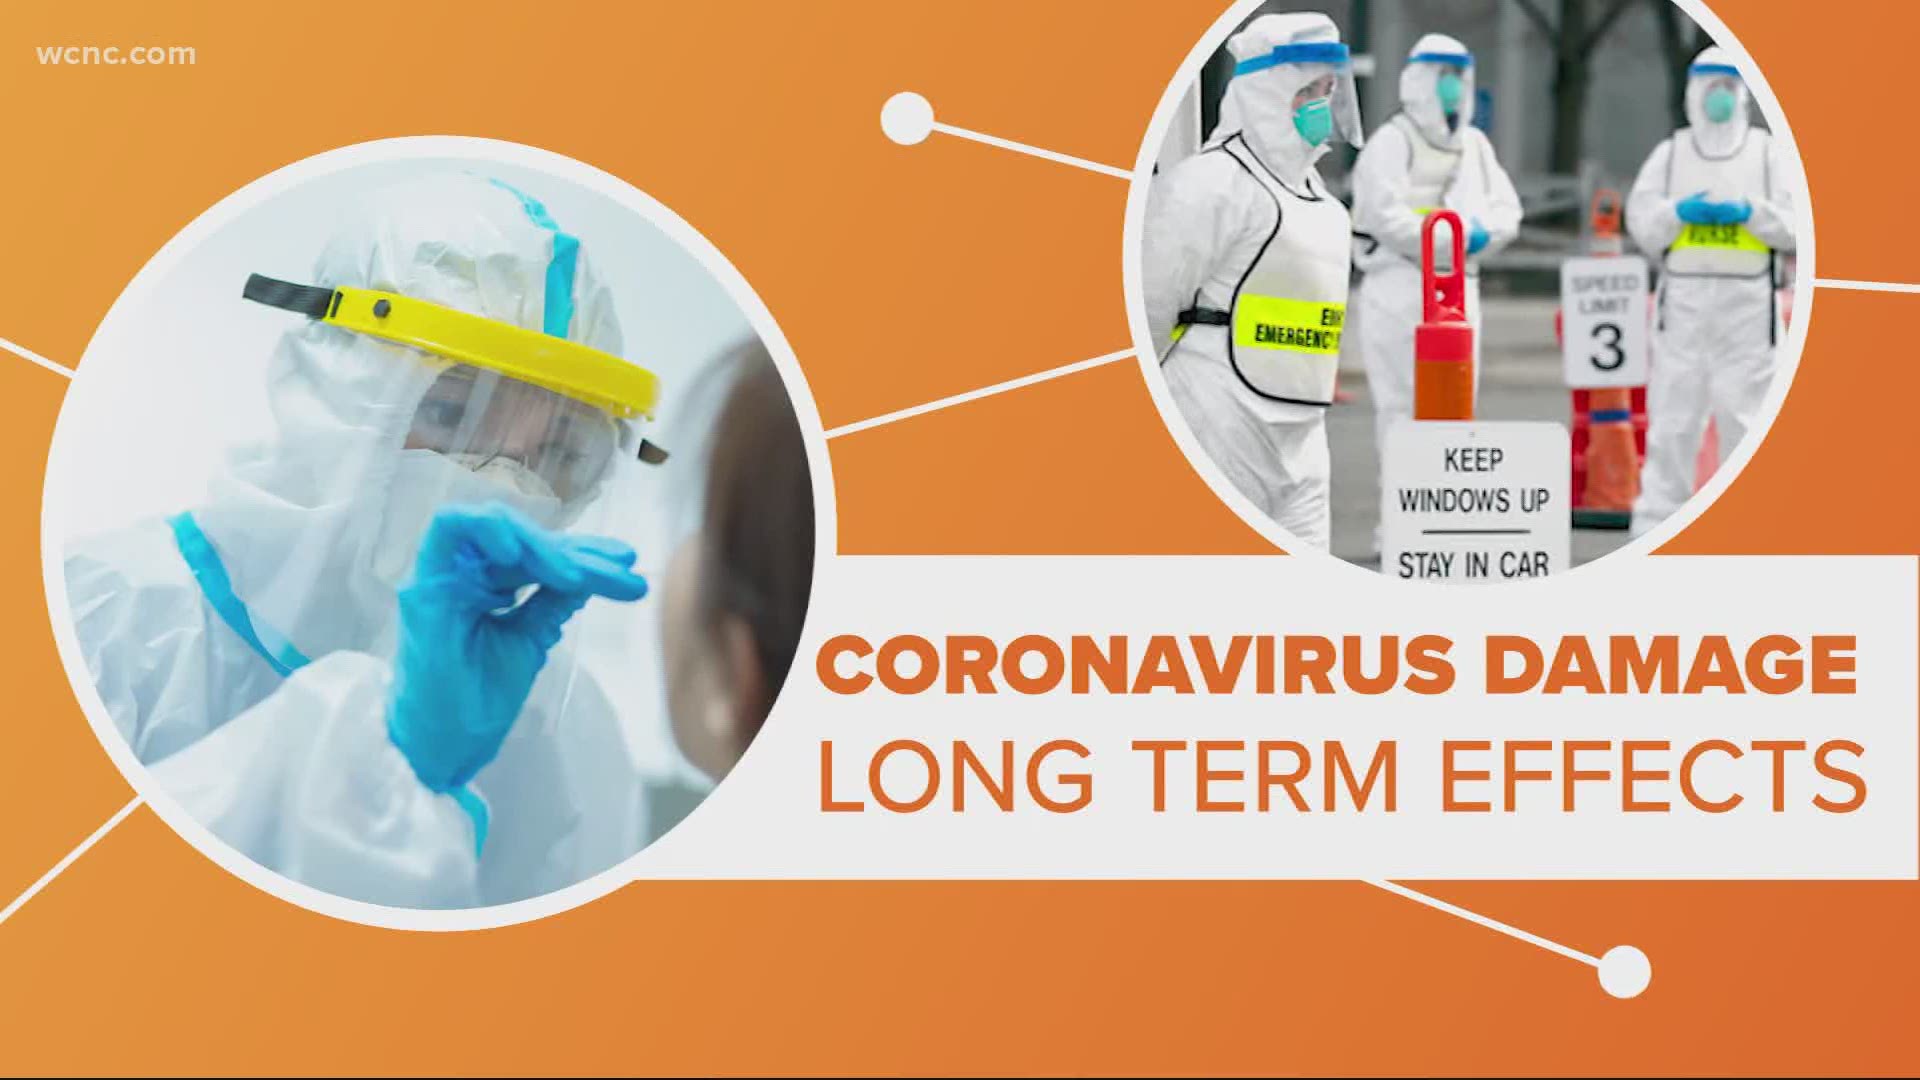 The long term effects could be more serious than first thought.  Doctors say many patients who recovered from coronavirus still show heart damage.